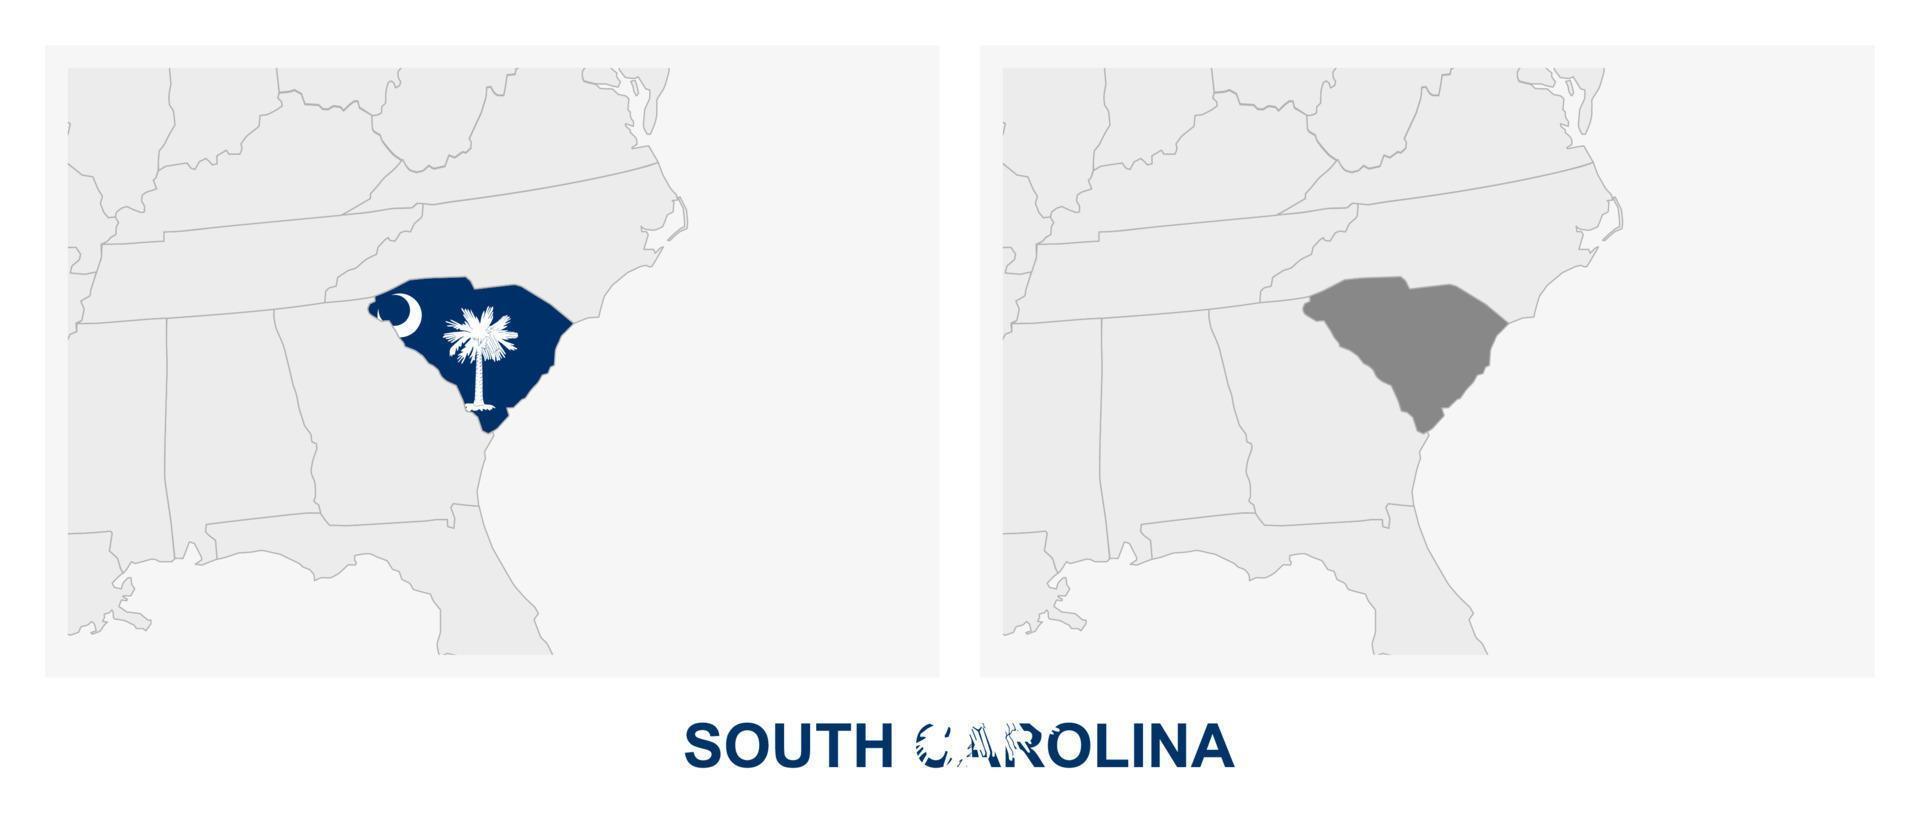 Two versions of the map of US State South Carolina, with the flag of South Carolina and highlighted in dark grey. vector